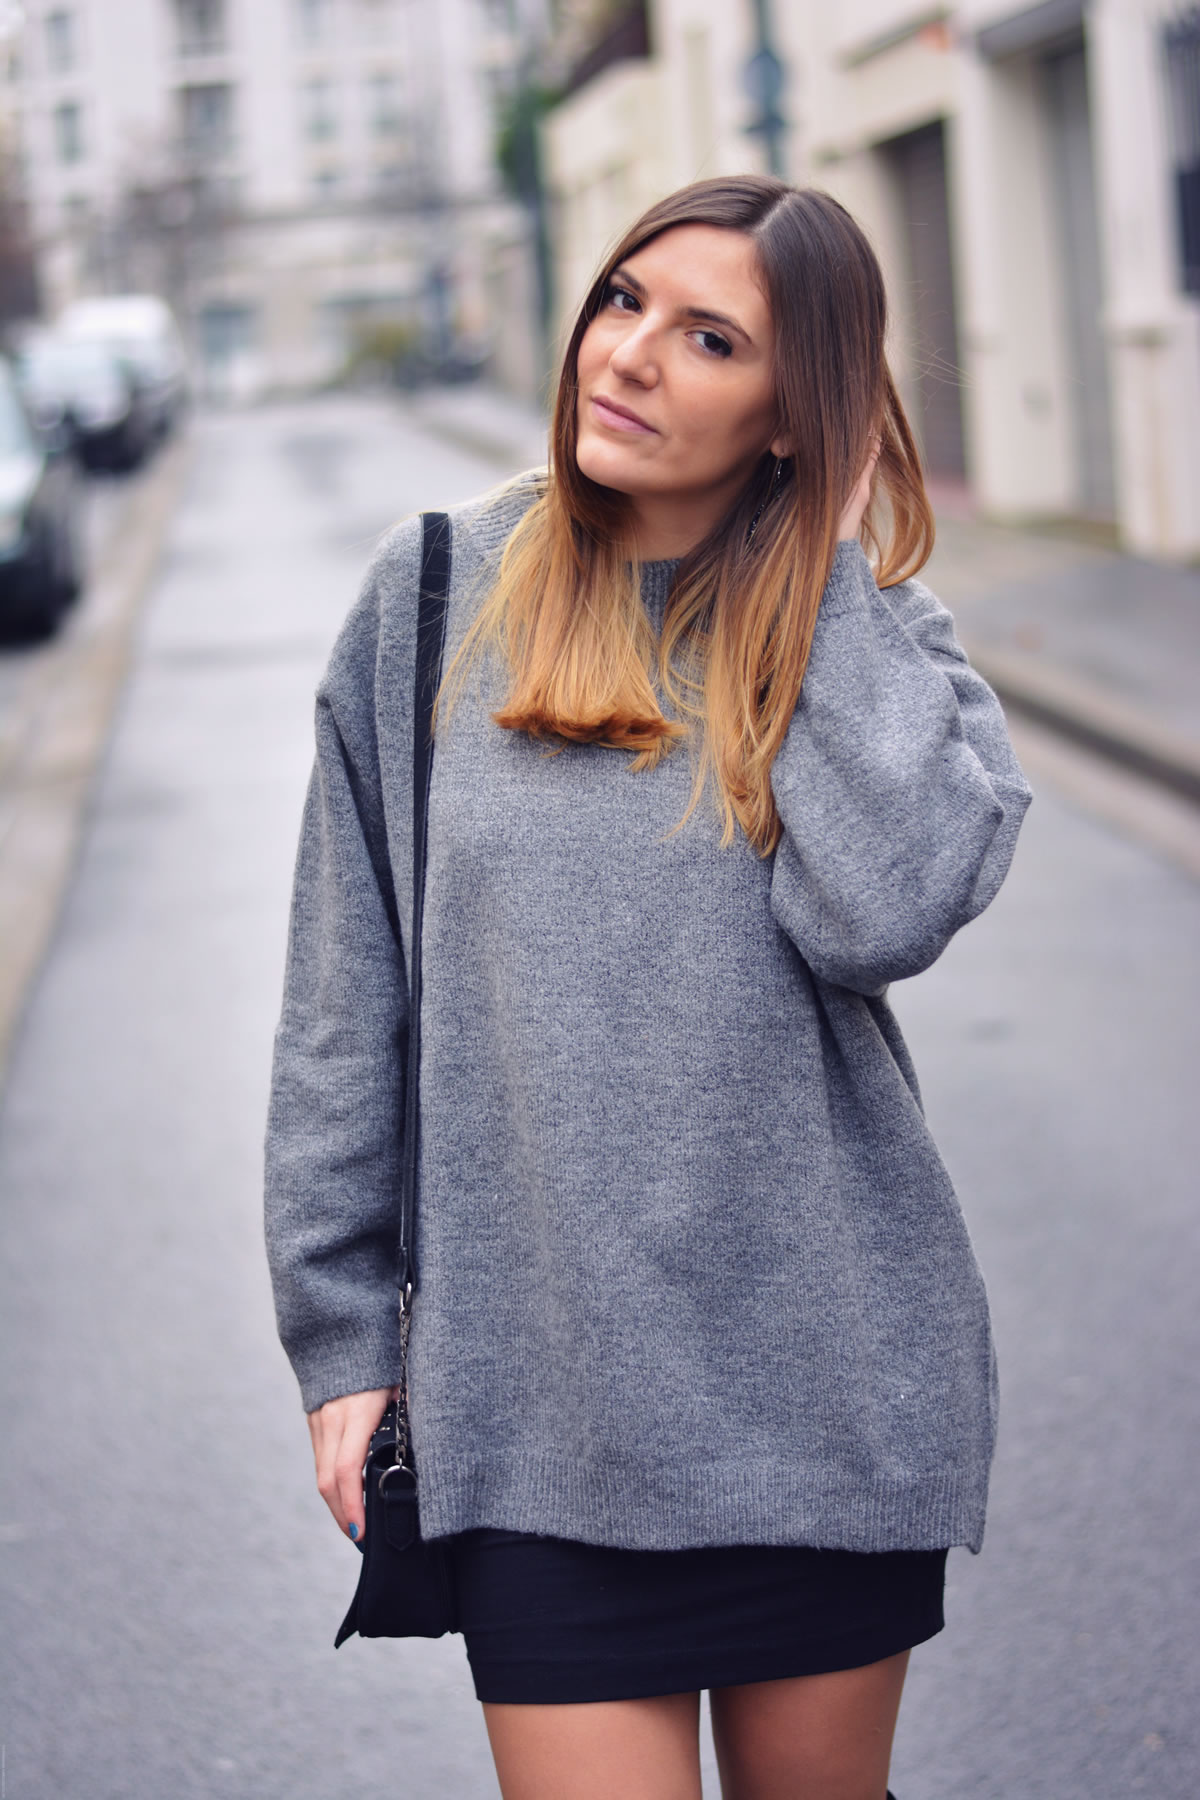 comment porter le pull extra large